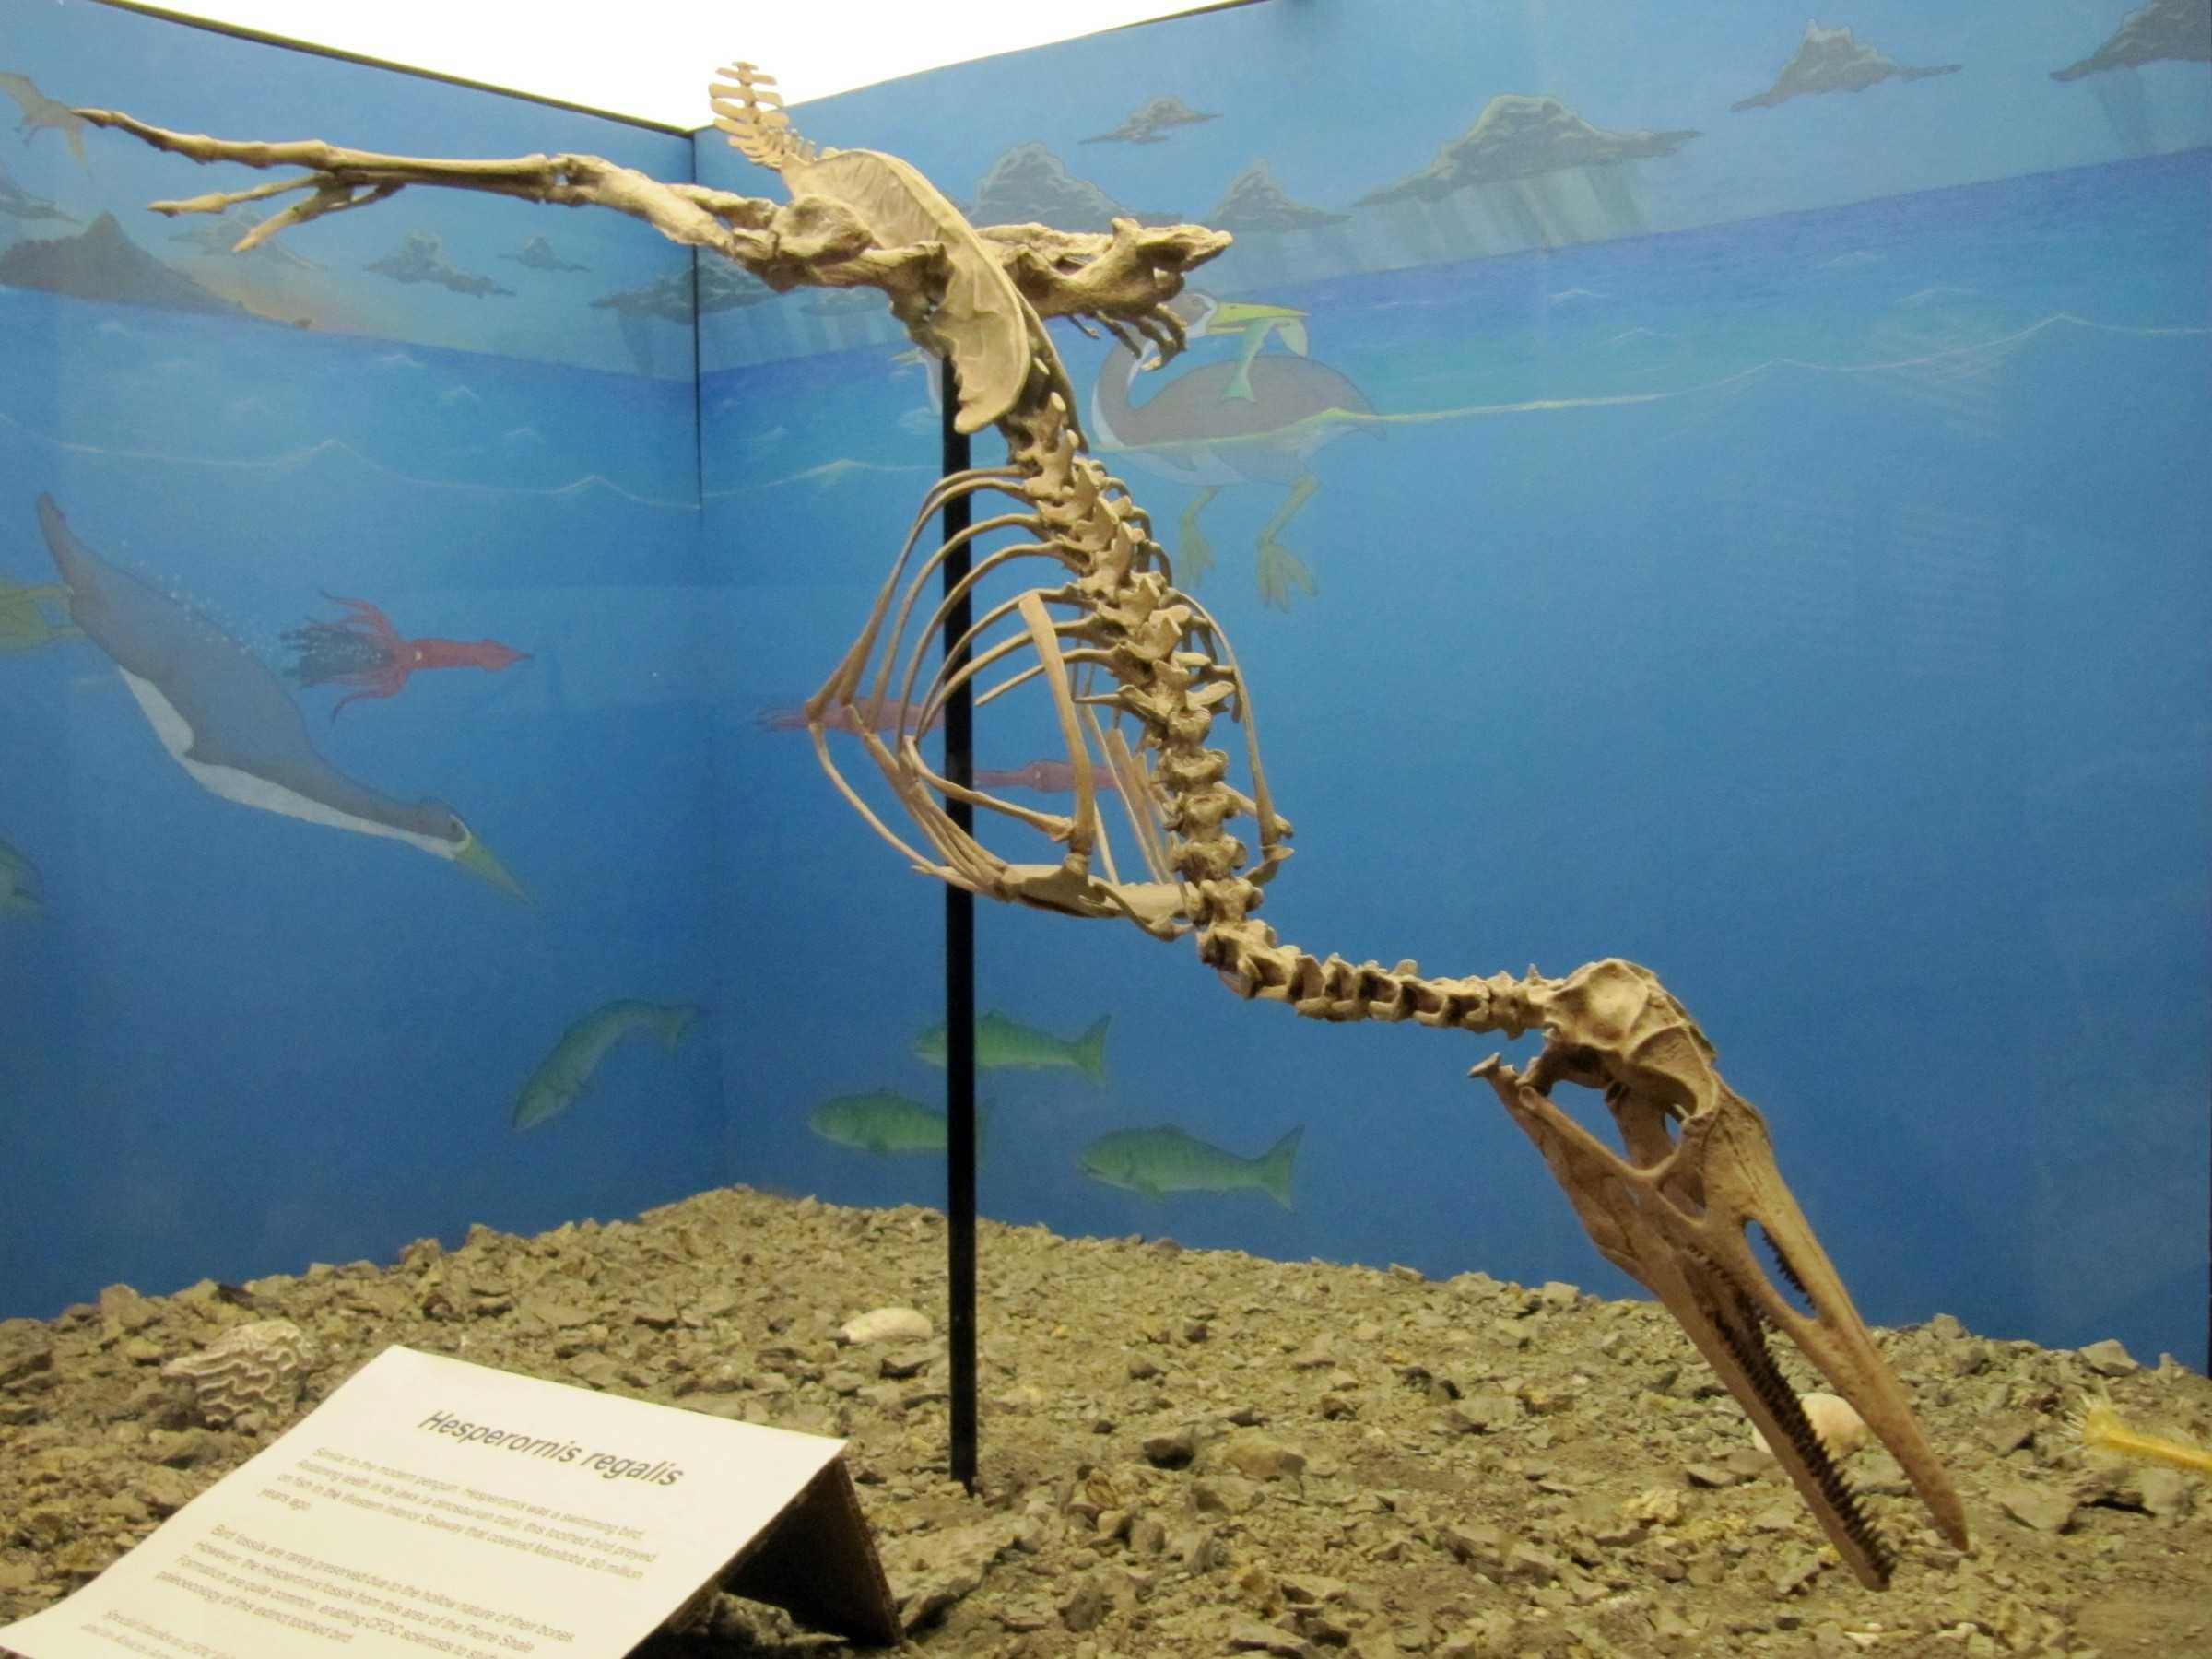 Hesperornis regalis skeleton at the Canadian Fossil Discovery Centre, Morden, MB.